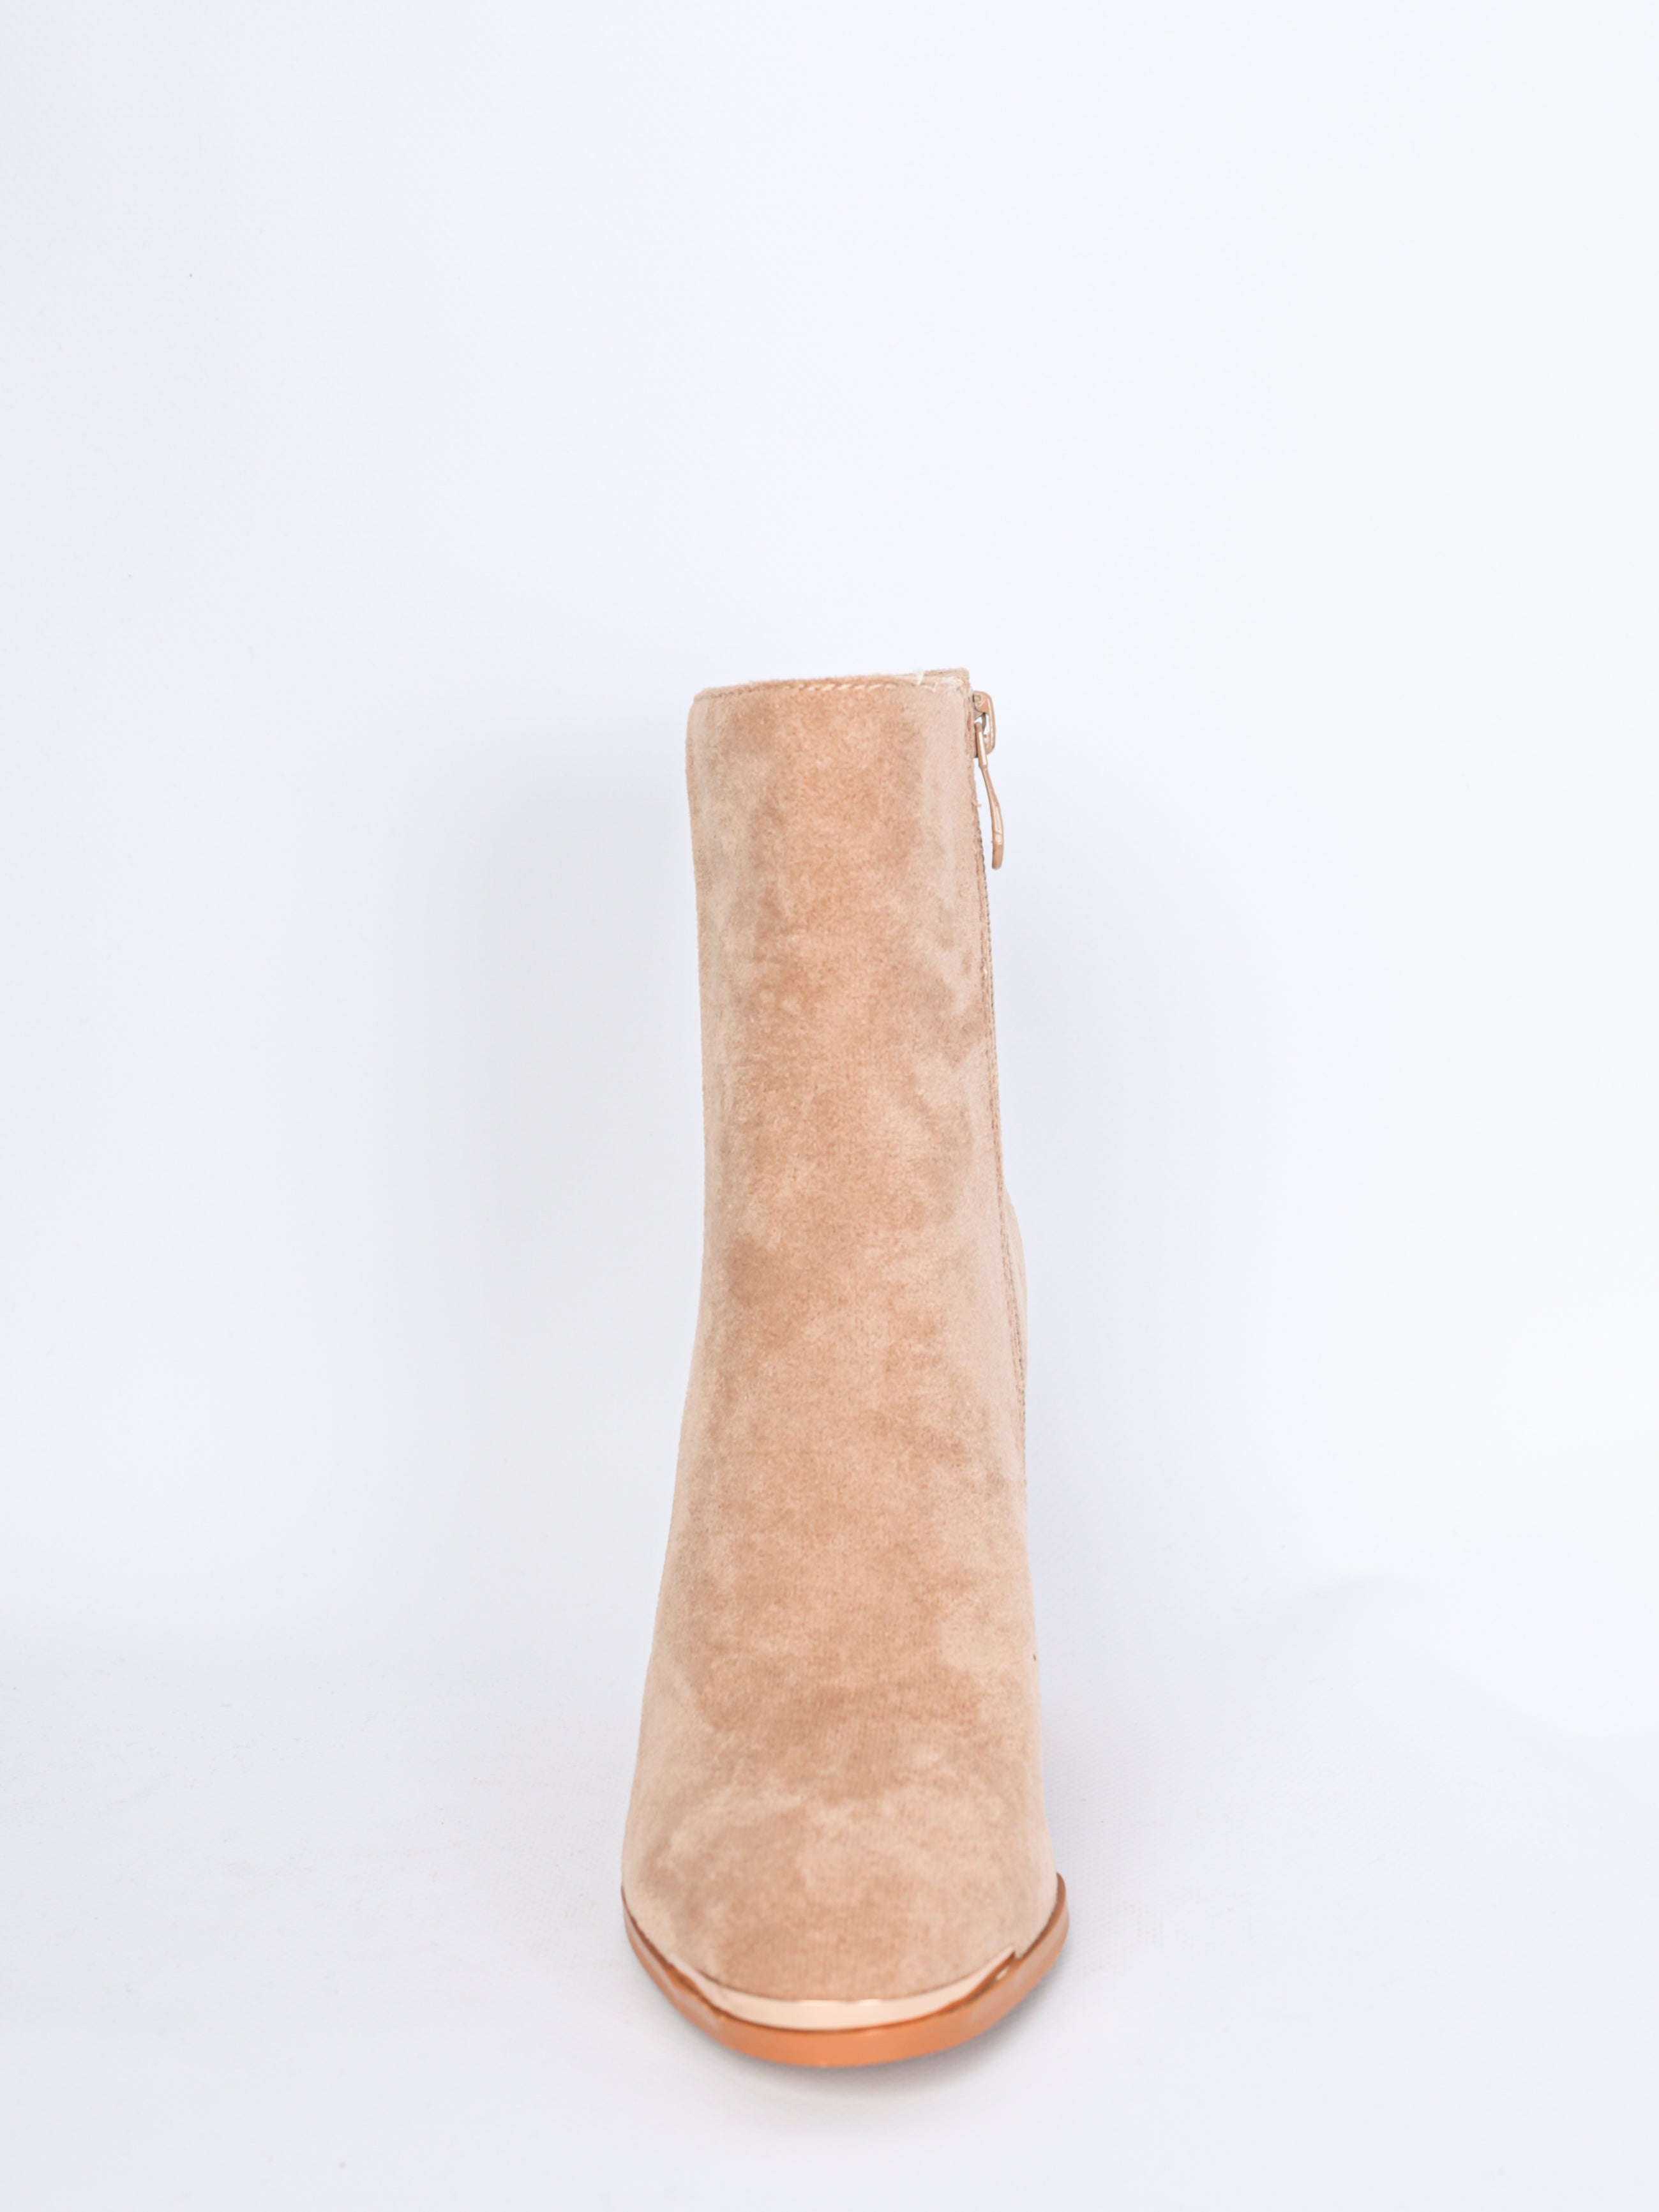 Imitation suede boots with gold detail